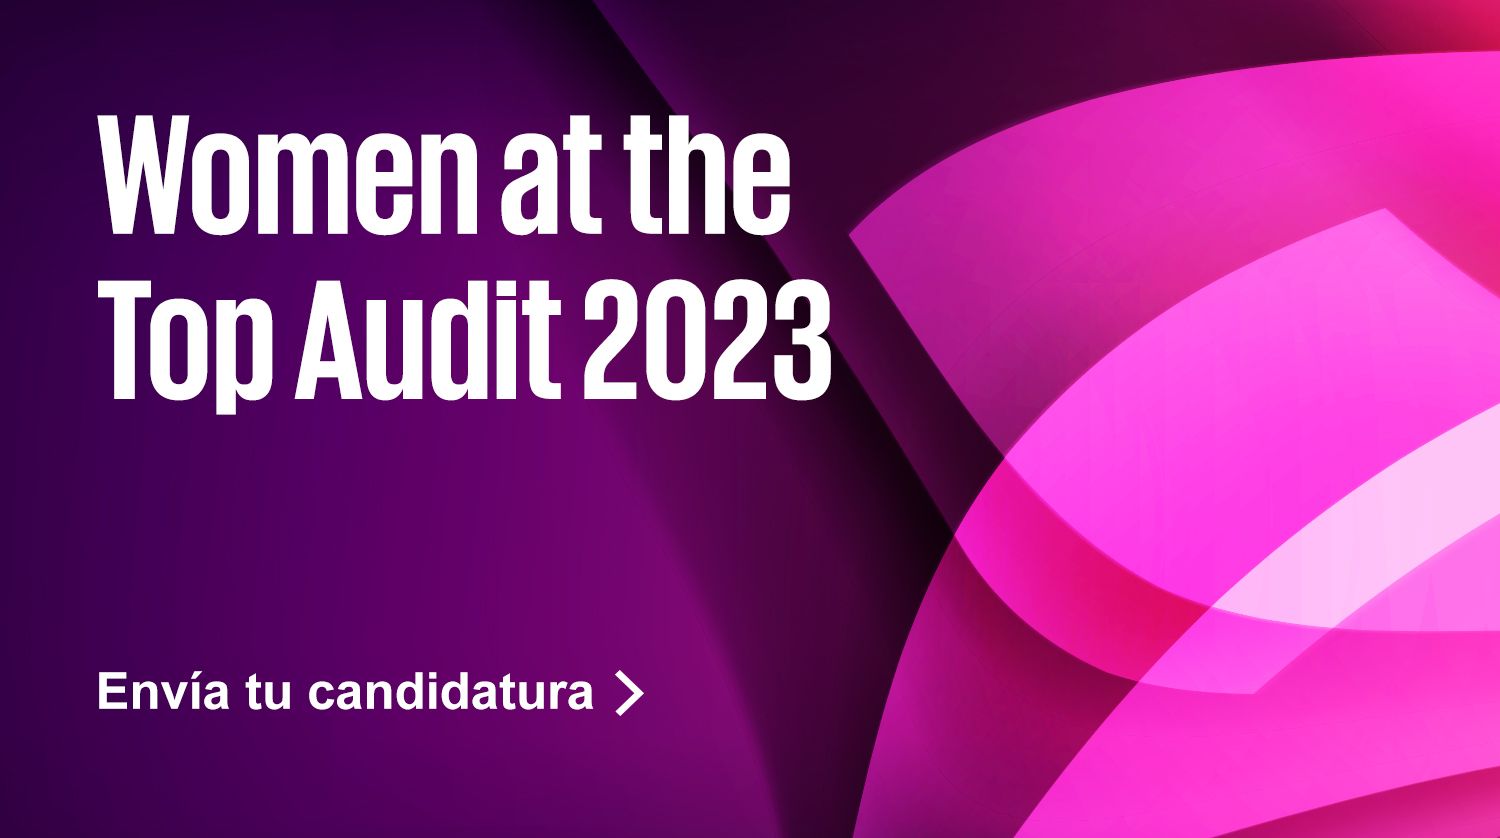 Women at the top Audit 2022